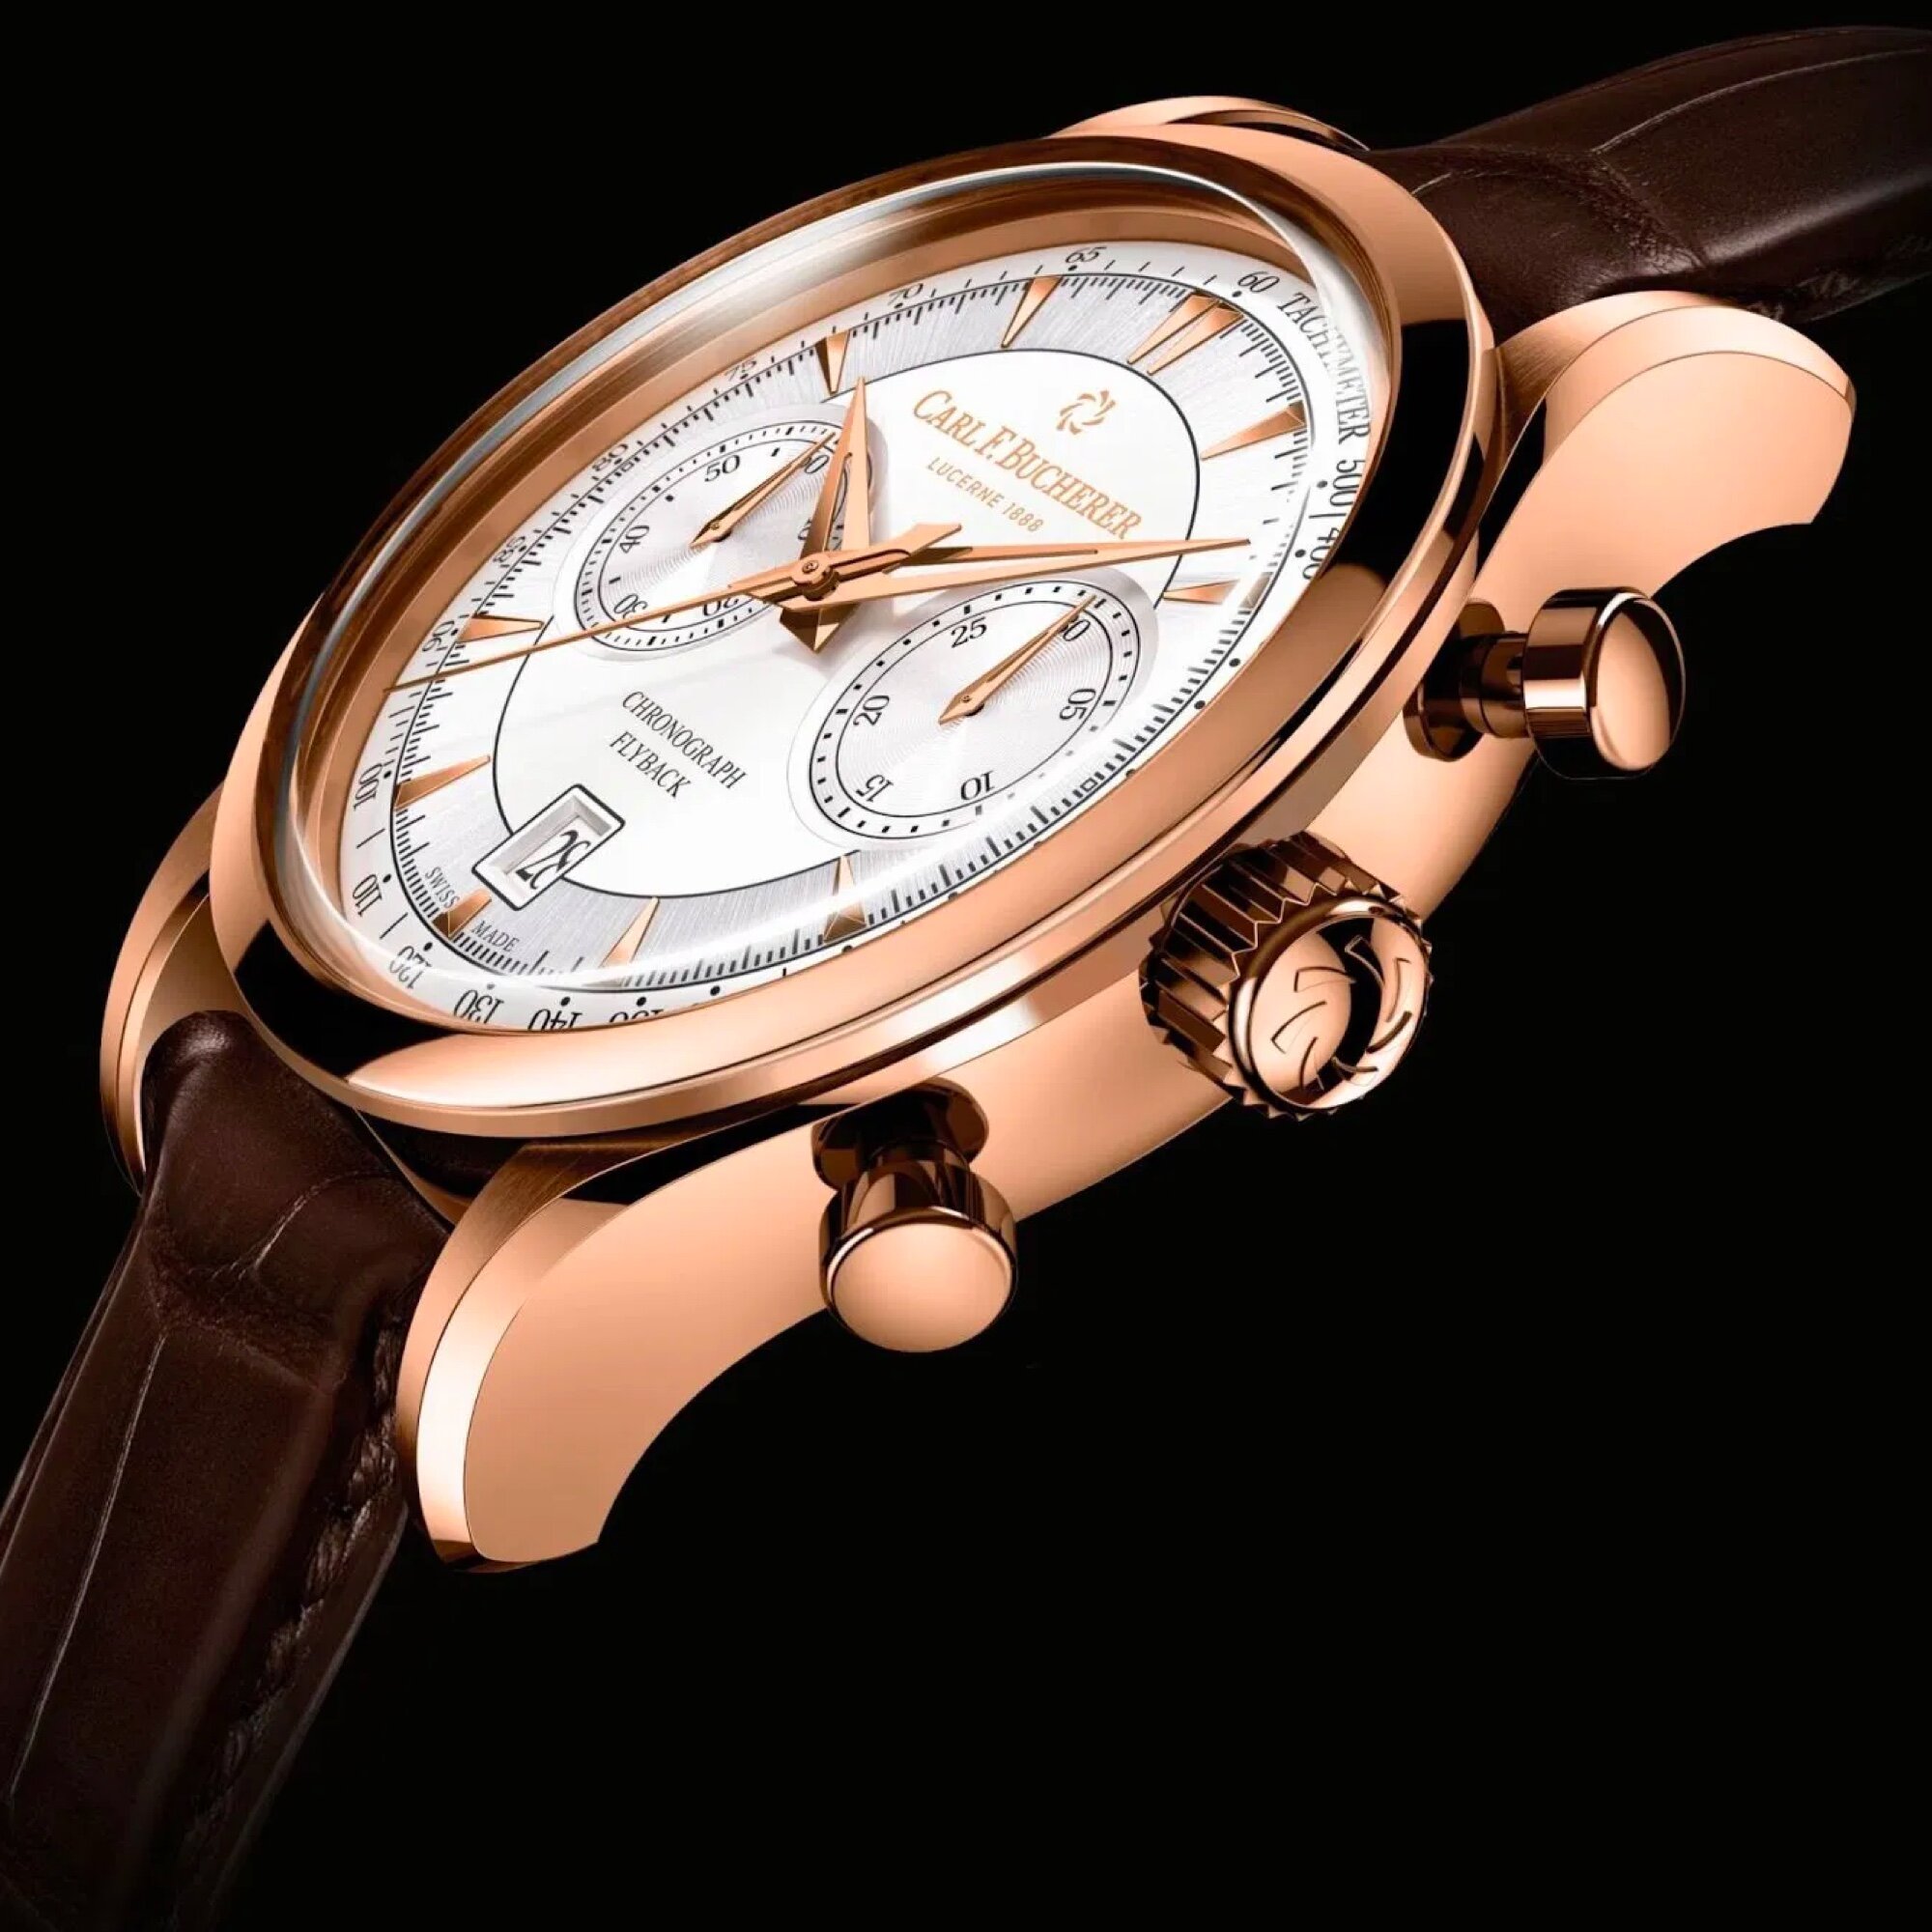 Carl F. Bucherer — The Watch Connection